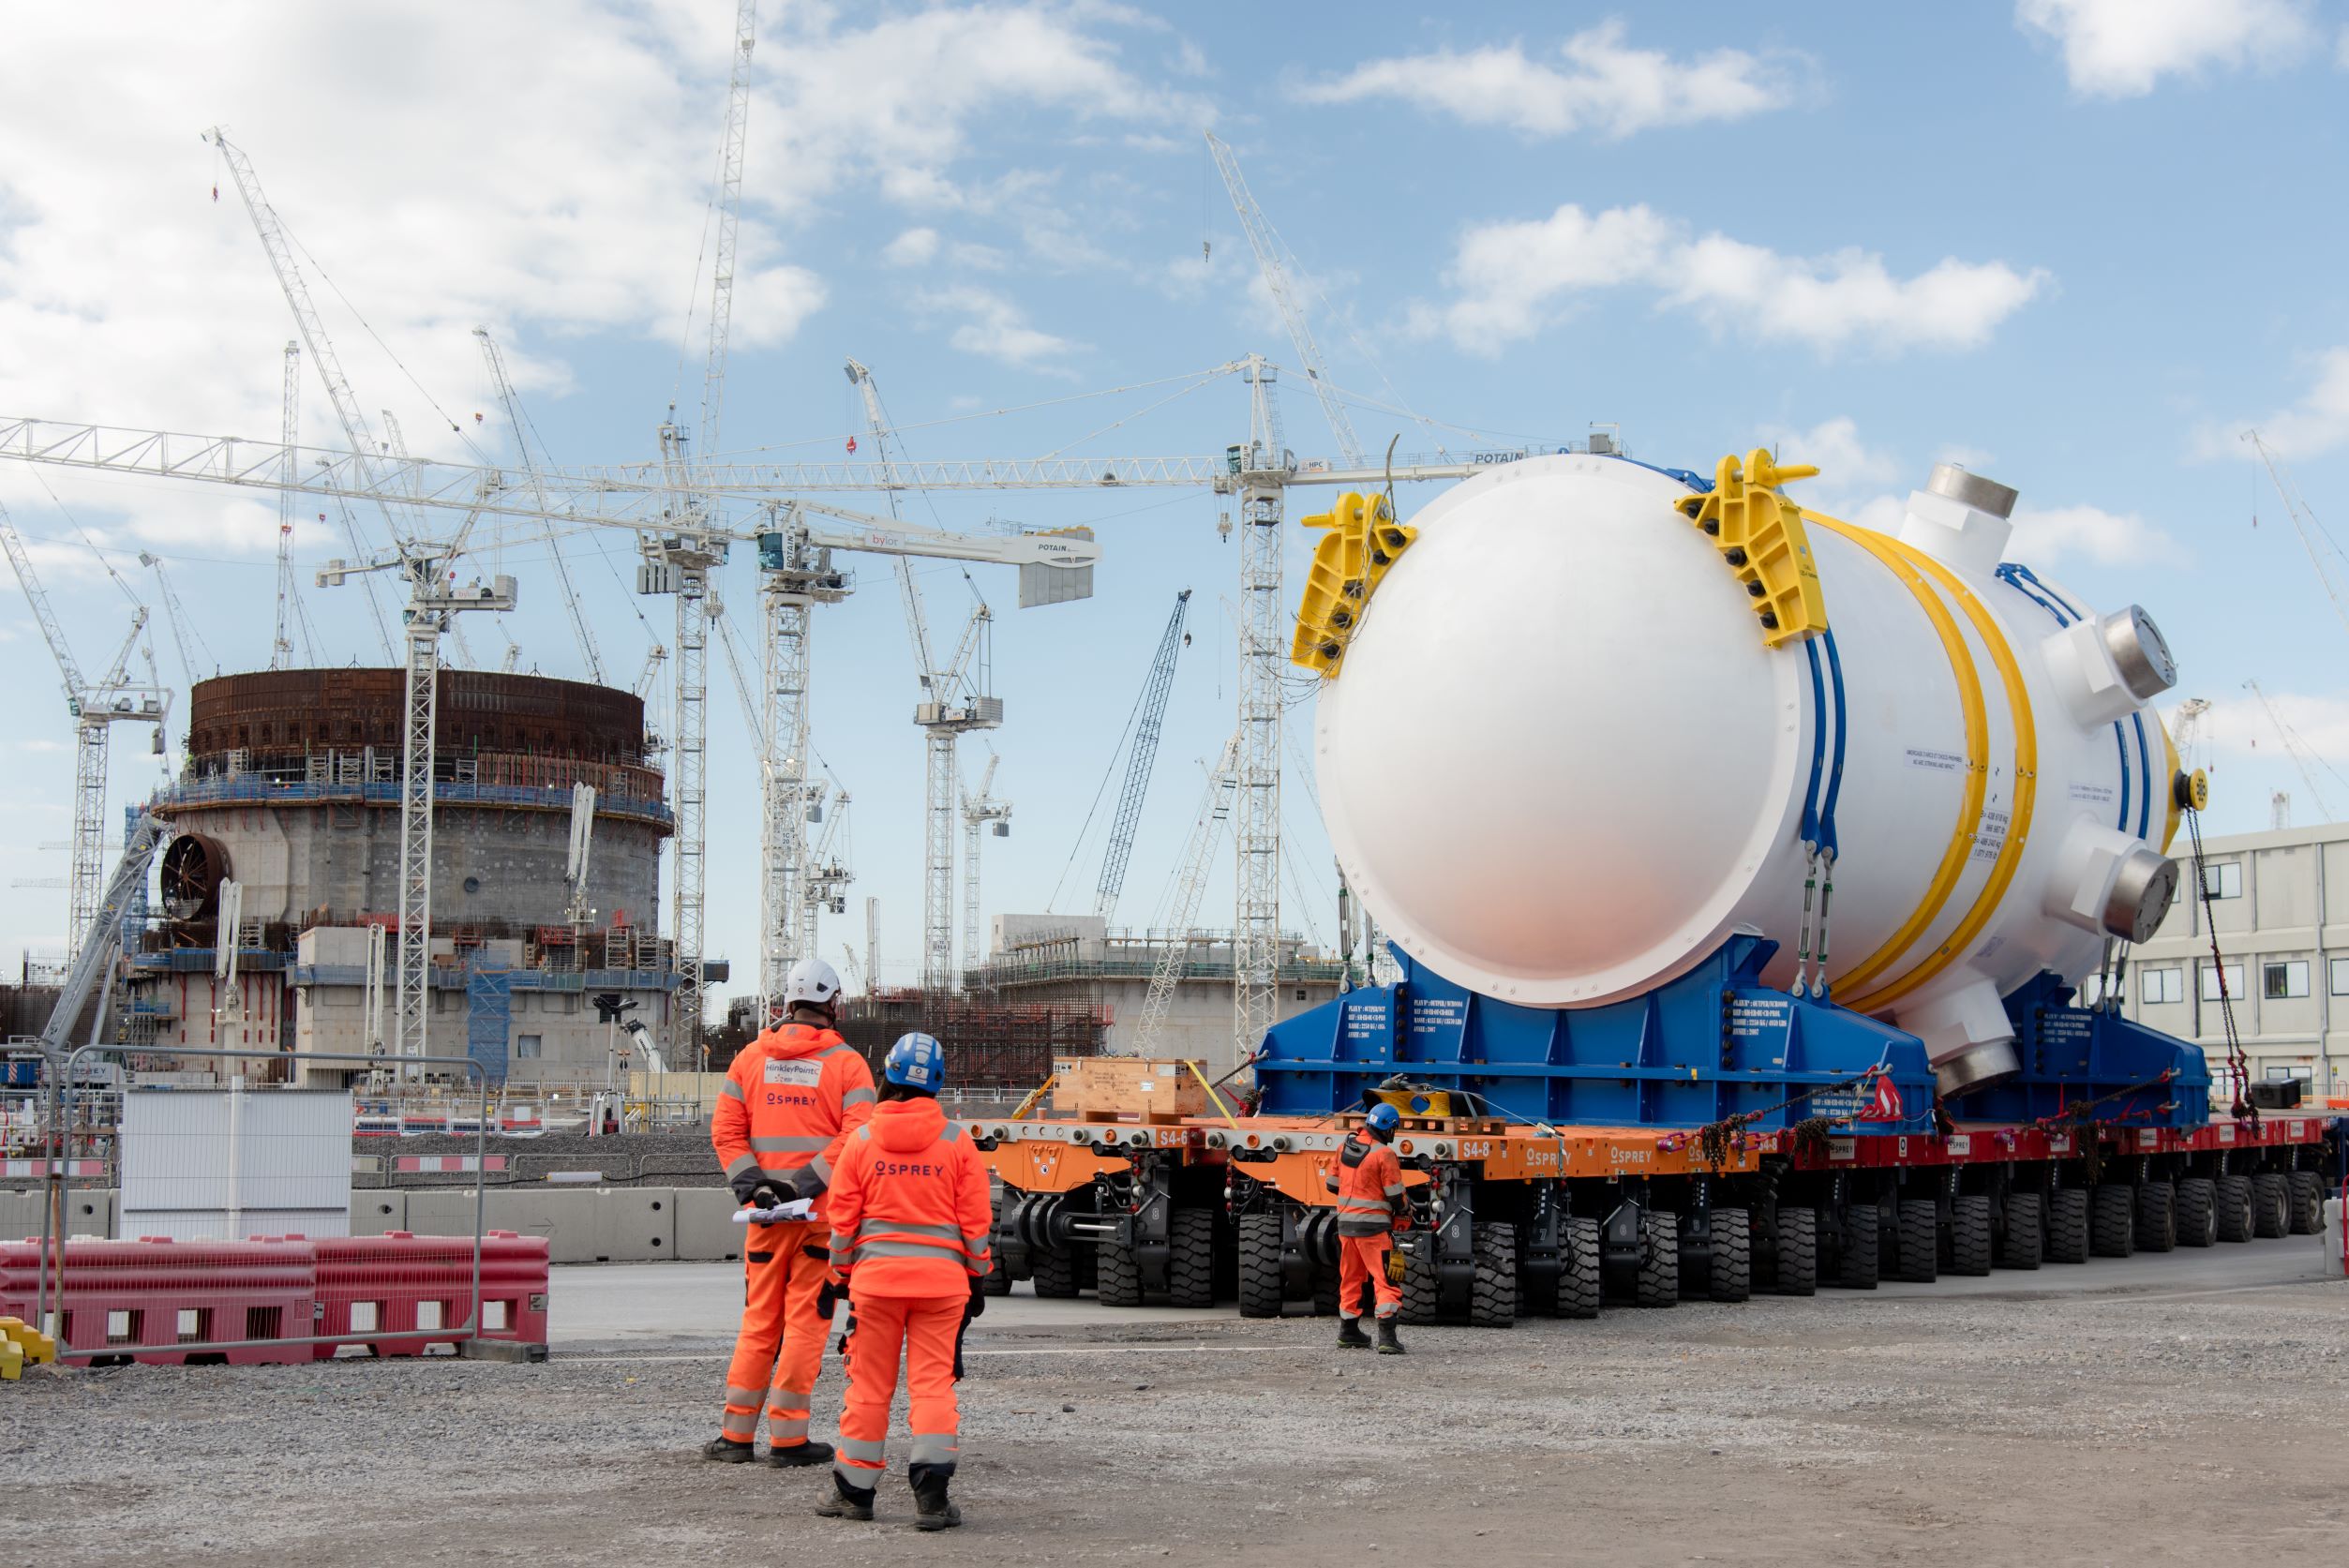 Ospreys QHSE team, engineers, project managers, heavy lift team and QHSE working together to transport a reactor pressure vessel by SPMT to HPC.